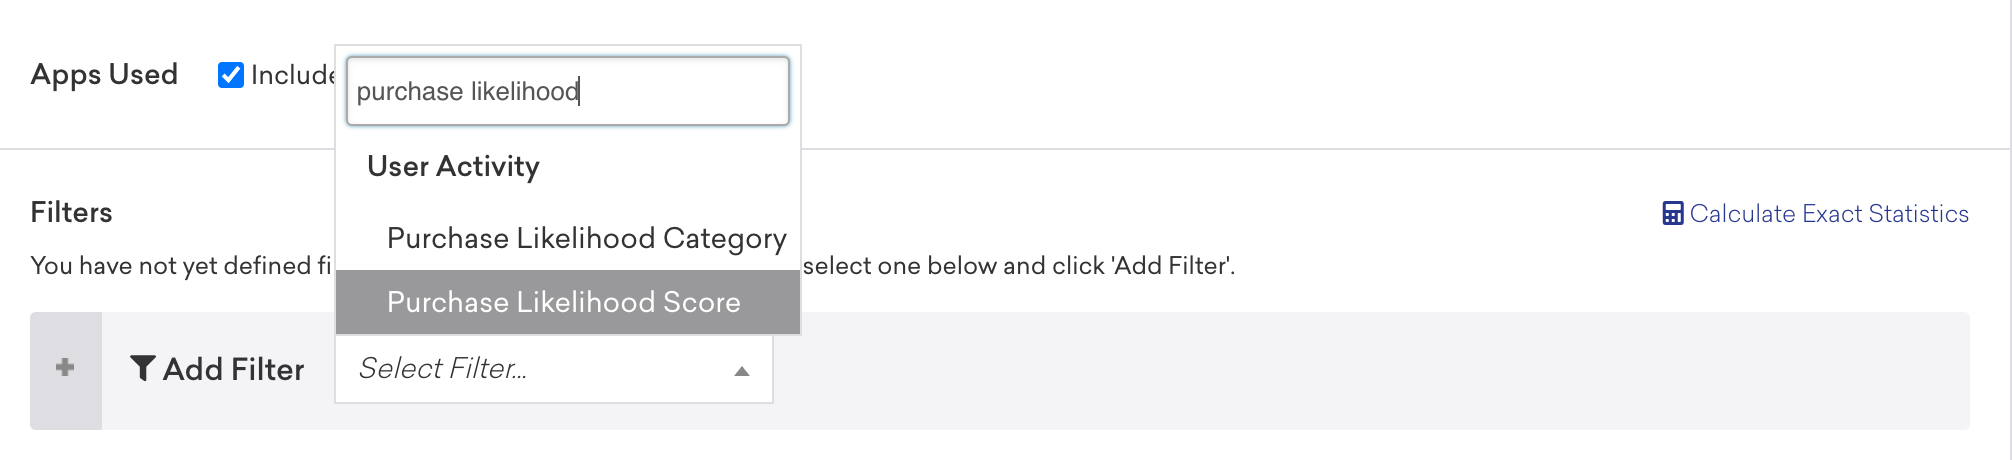 Churn filters available when defining an audience include Purchase Likelihood Category and Purchase Likelihood Score.